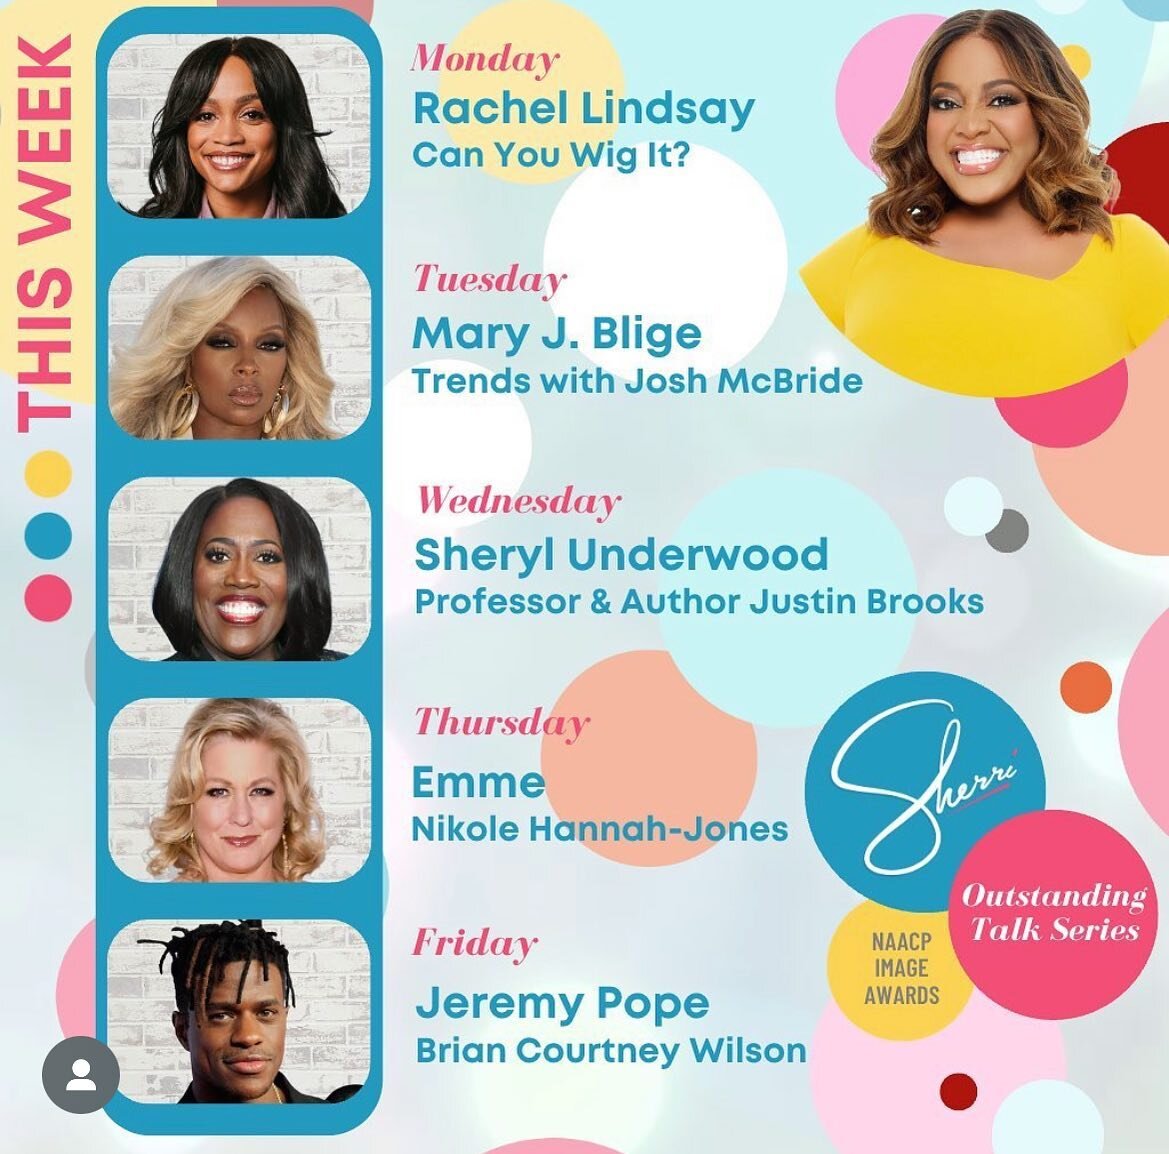 Shout out 📣friends!! 
I&rsquo;m going on the 
Sherri Shepherd Show NAACP Image Awards&rsquo; Outstanding Talk Series🥂on this Thursday!!!

What a journey, so deserved Sherri! Can&rsquo;t wait, we&rsquo;re going to have such a good time🎉

Thank you 